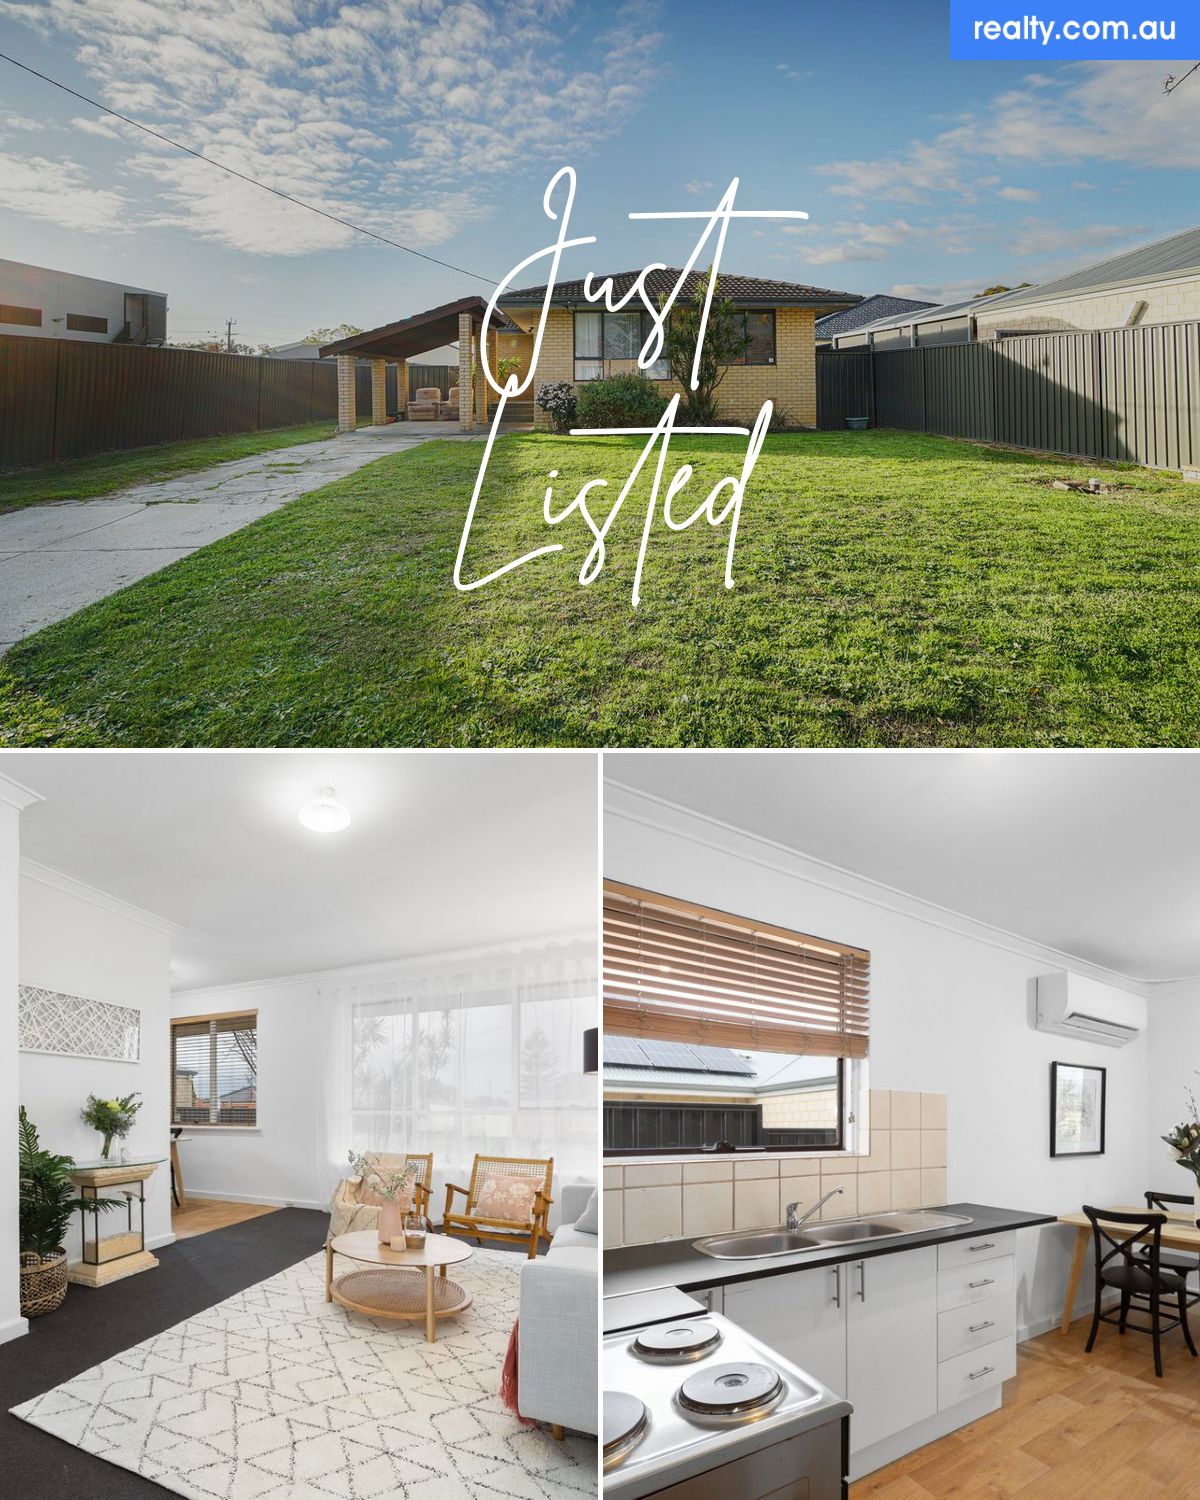 4 Tanner Street, Middle Swan, WA 6056 | Realty.com.au